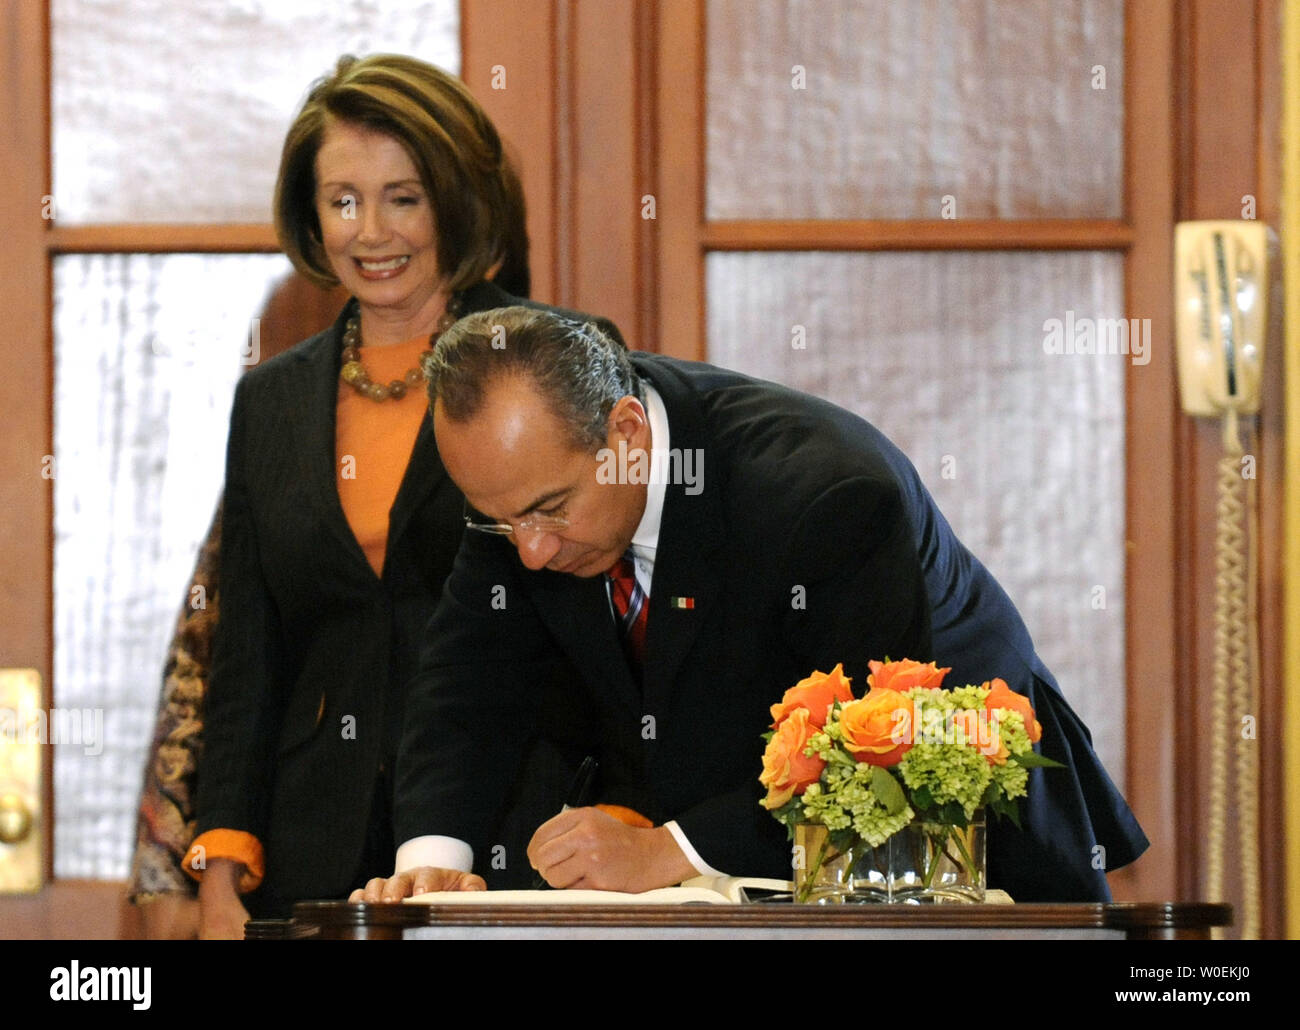 Mexican President Felipe Calderon signs a guest book as Speaker of the House Nancy Pelosi watches on, prior to a meeting on Capitol Hill in Washington on January 12, 2008. (UPI Photo/Kevin Dietsch) Stock Photo